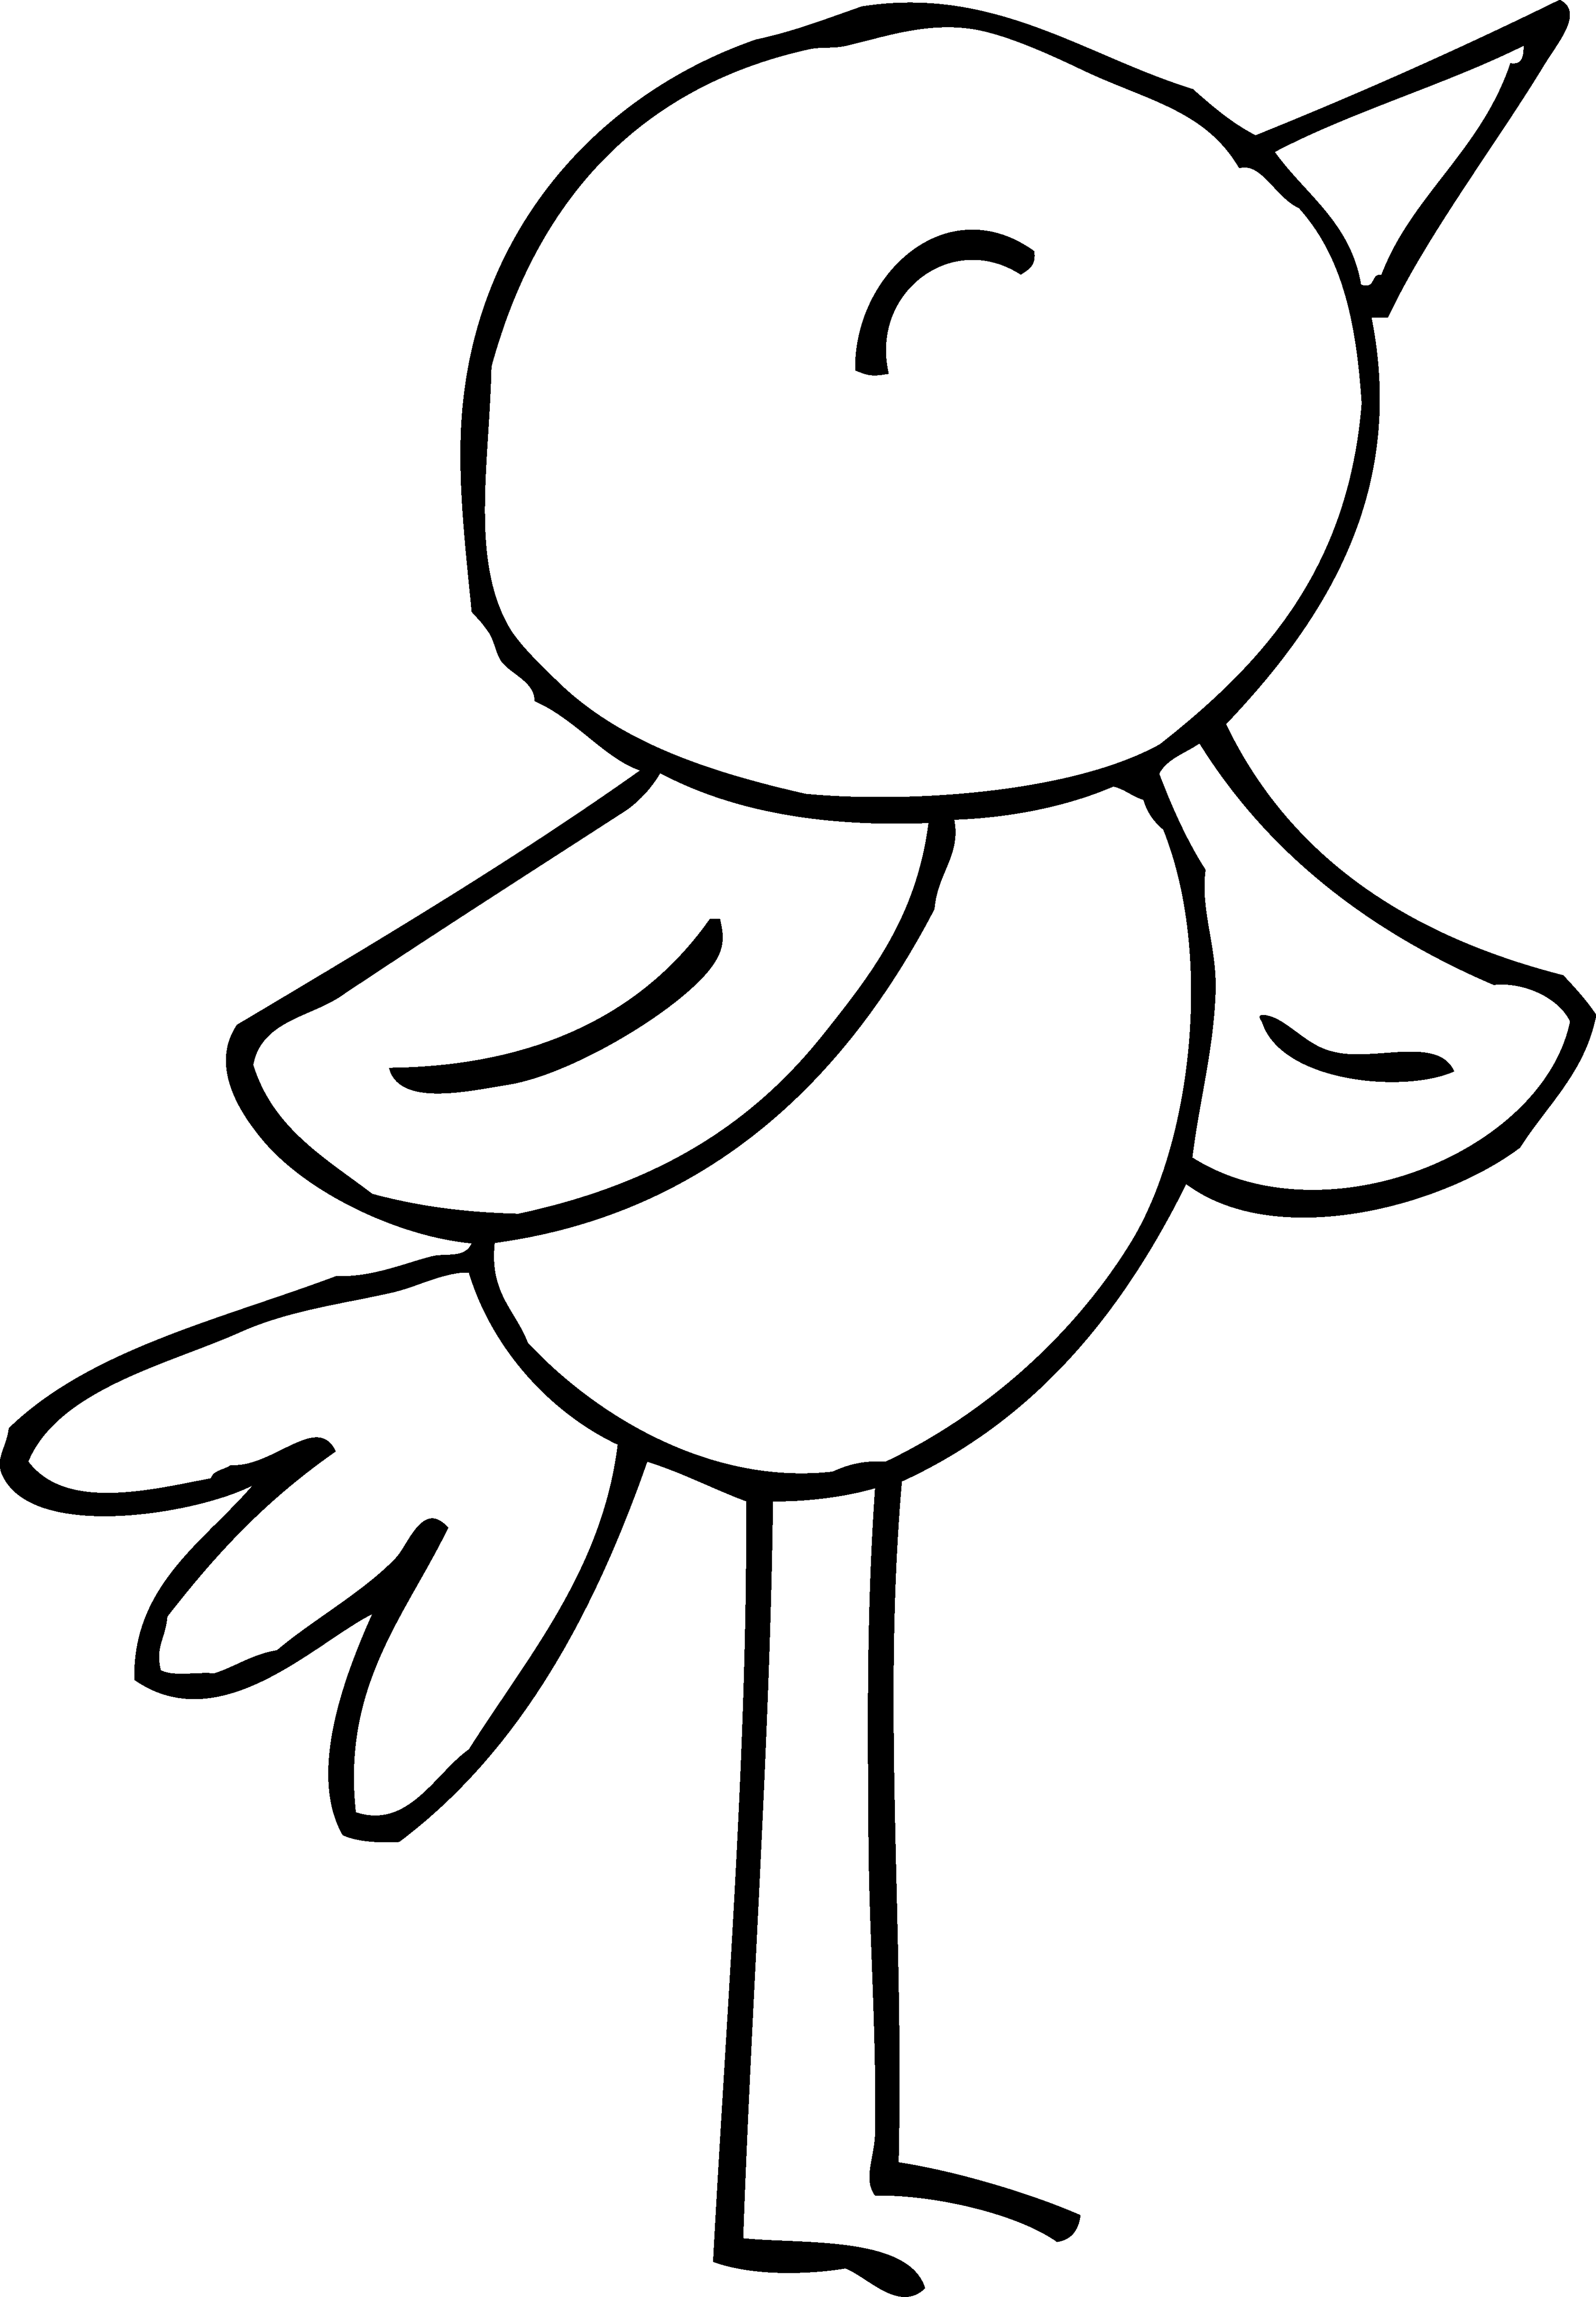 Free spring flower black and white clipart